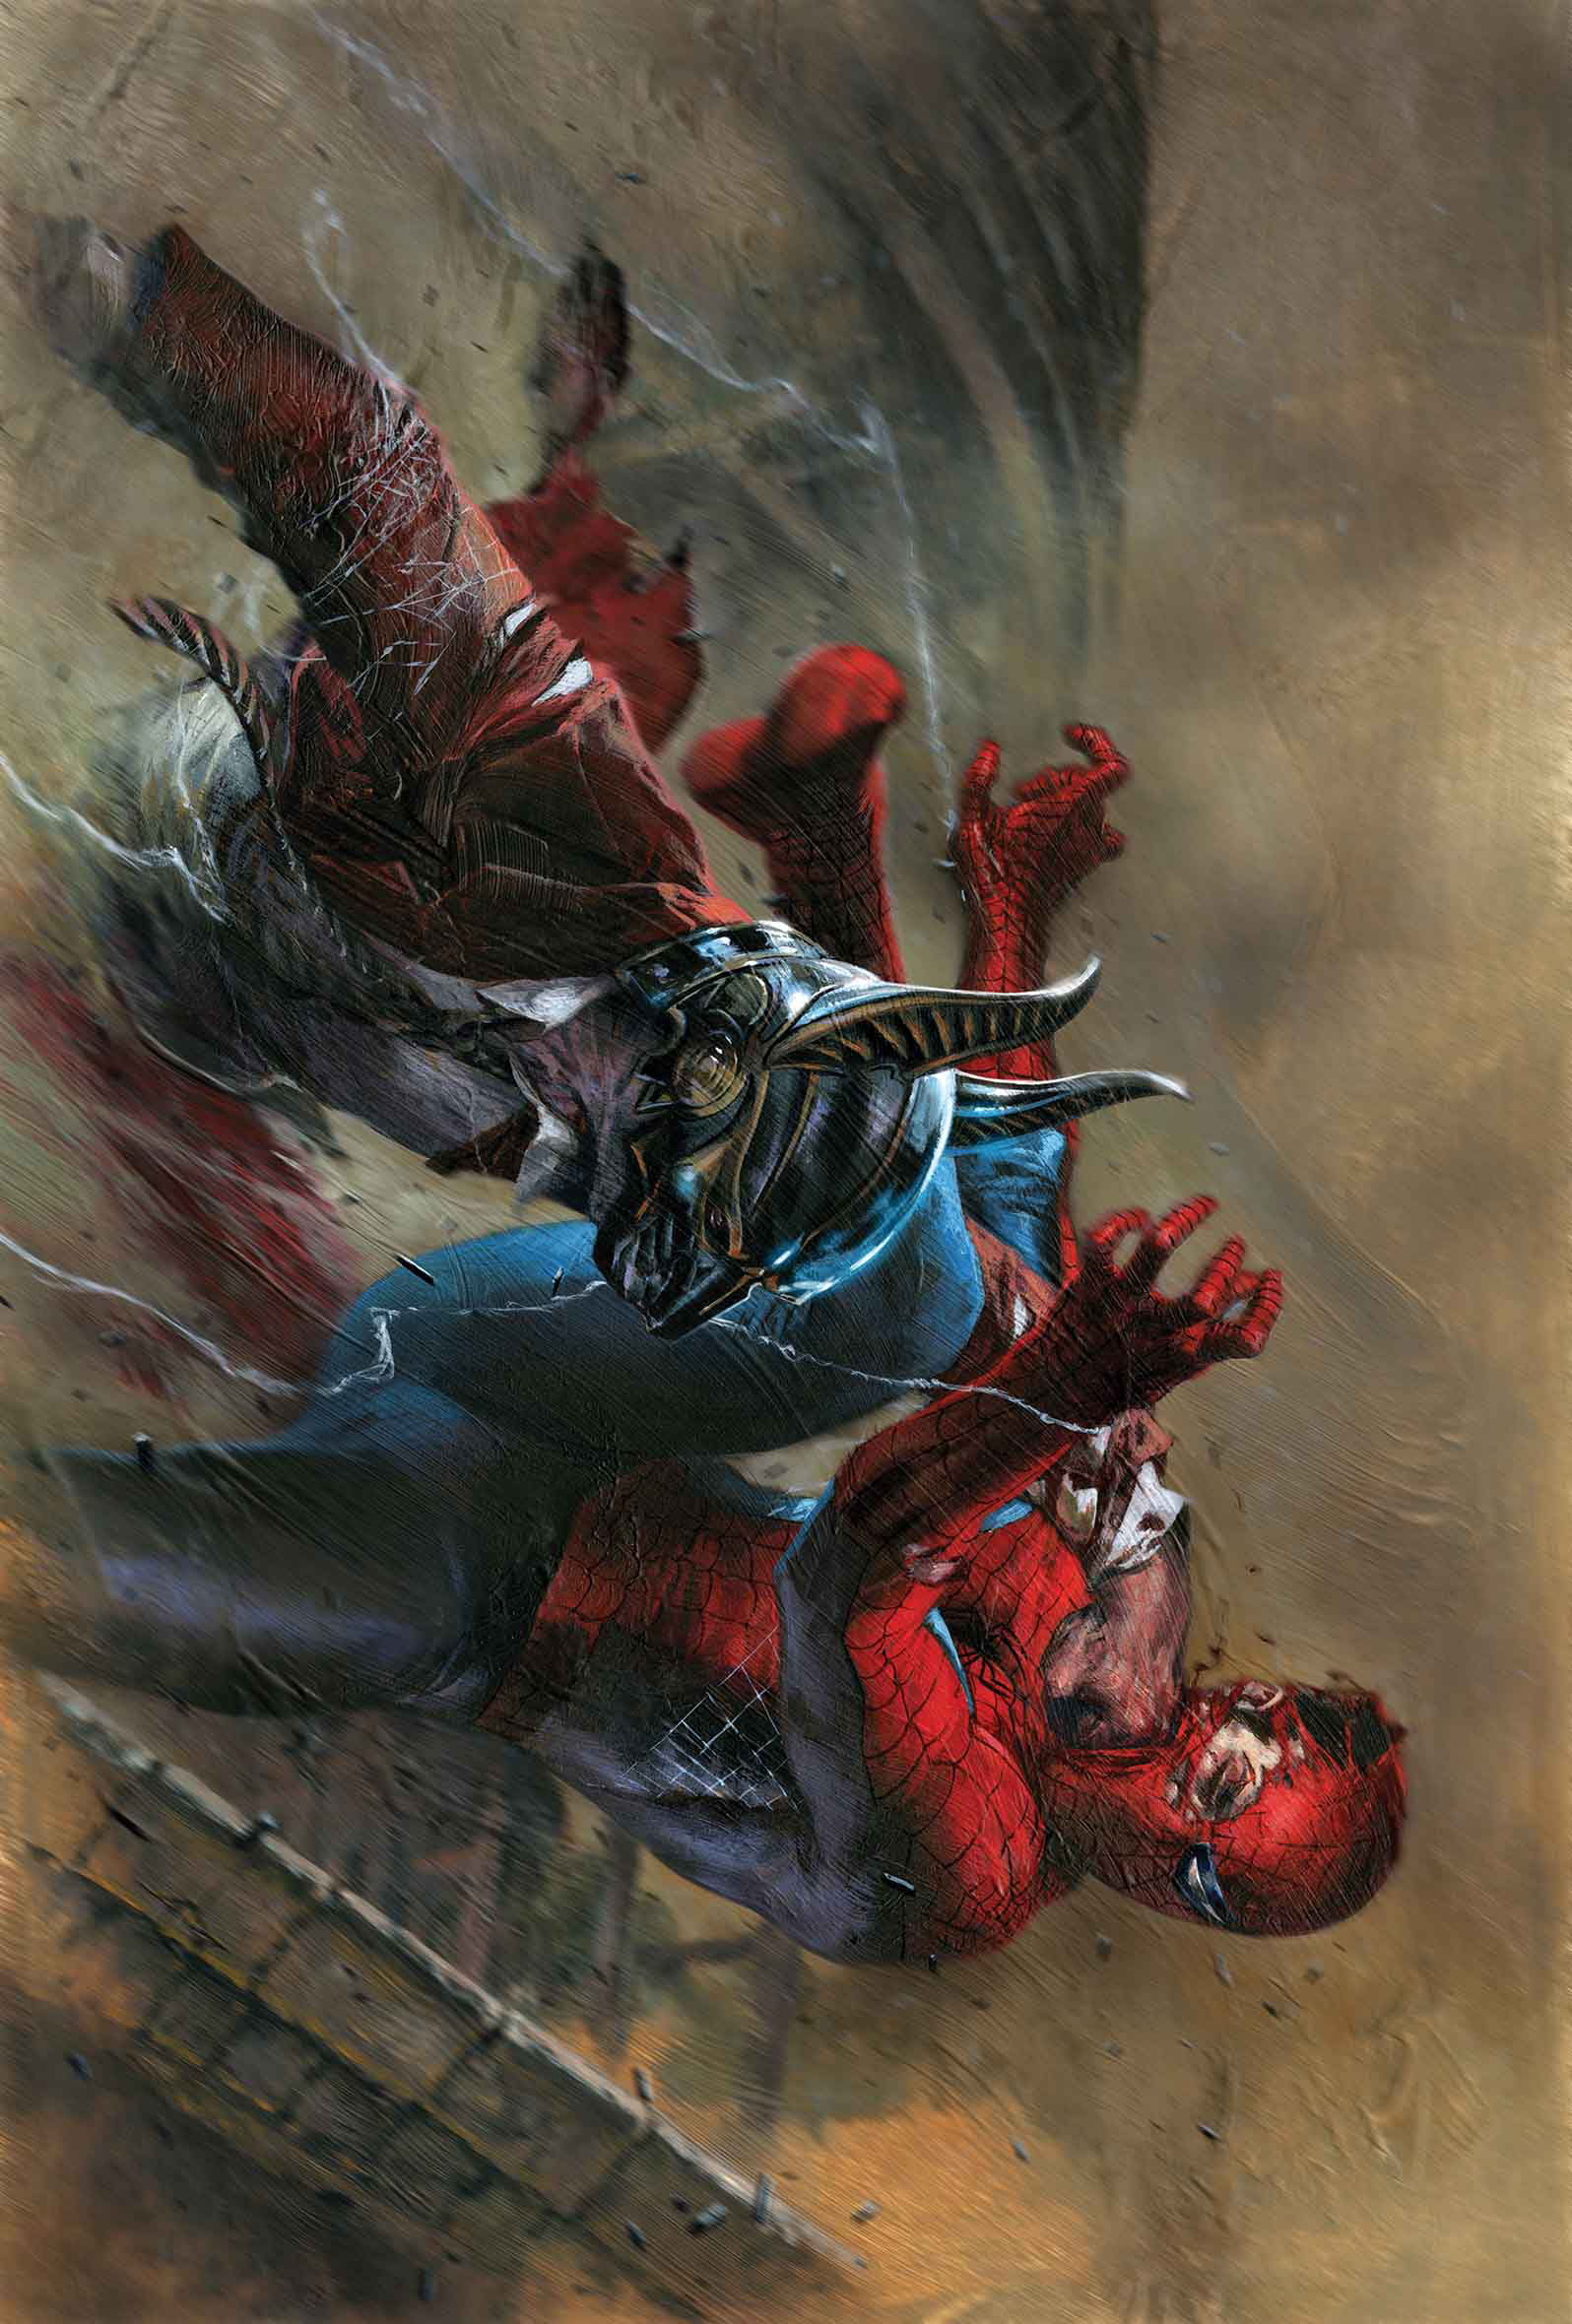 THE CLONE CONSPIRACY #3 (of 5)